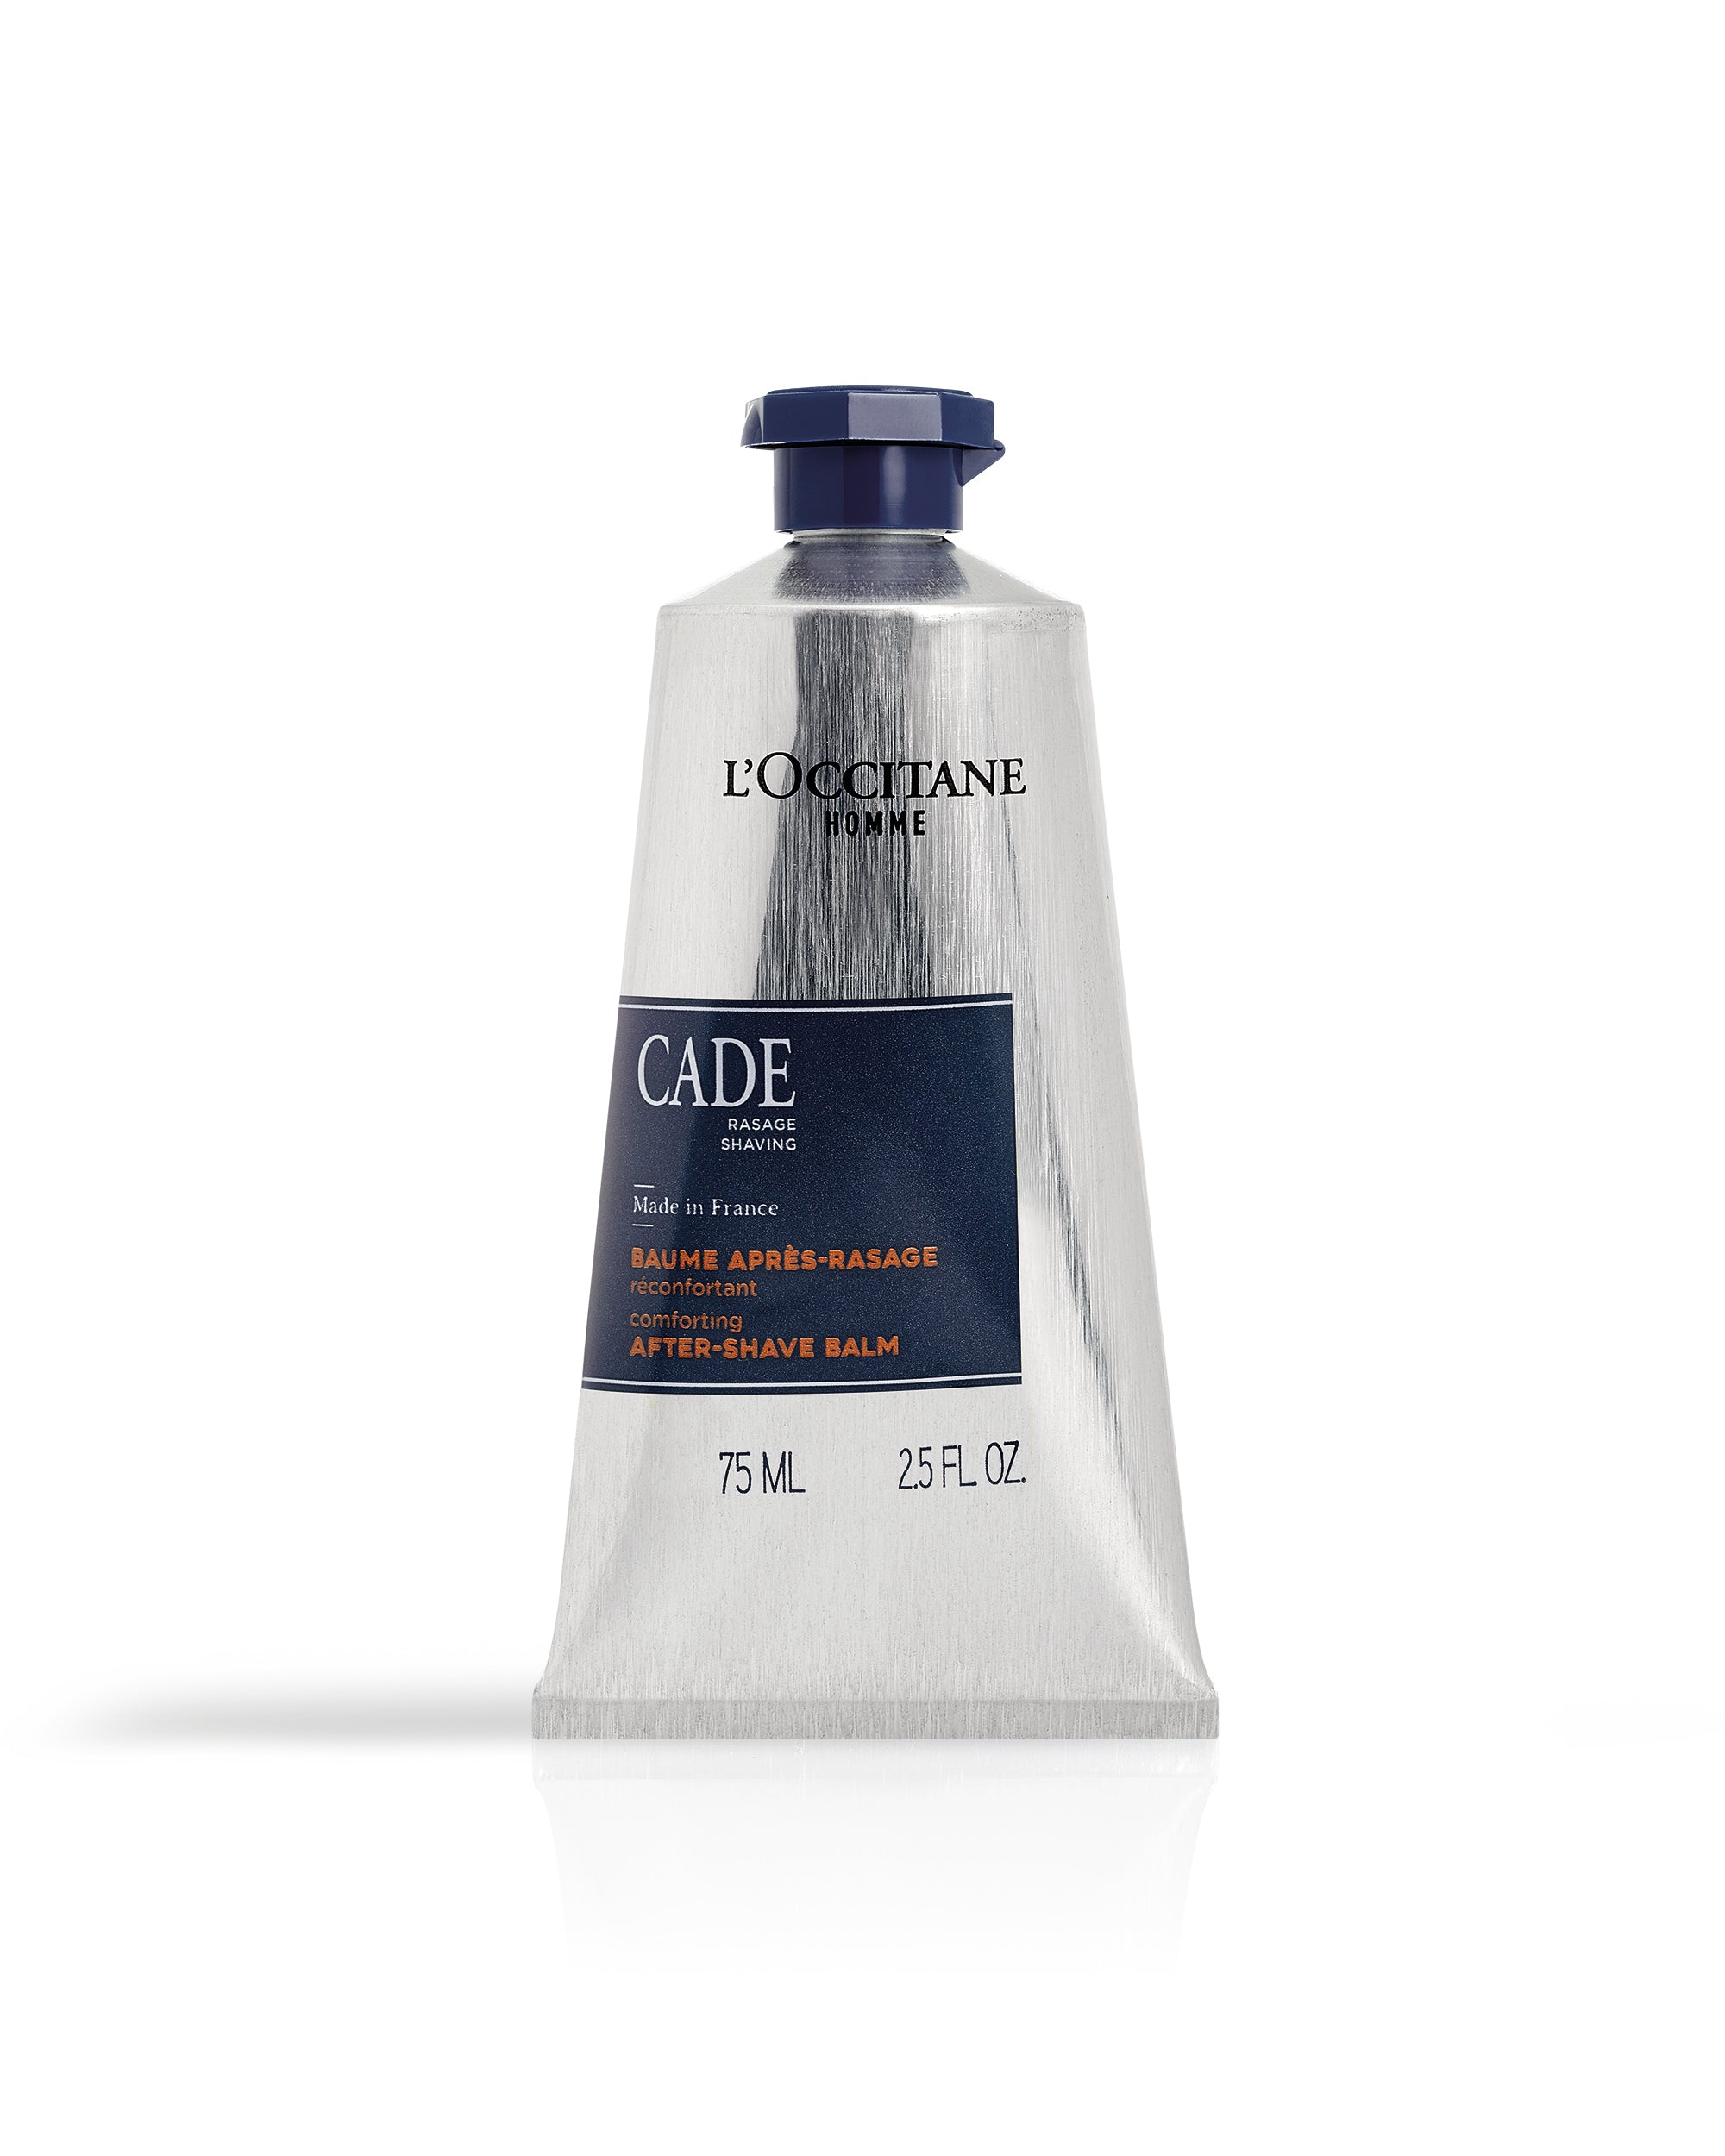 Image of L'Occitane Clade After Shave Balm with braille on the outer box packaging.